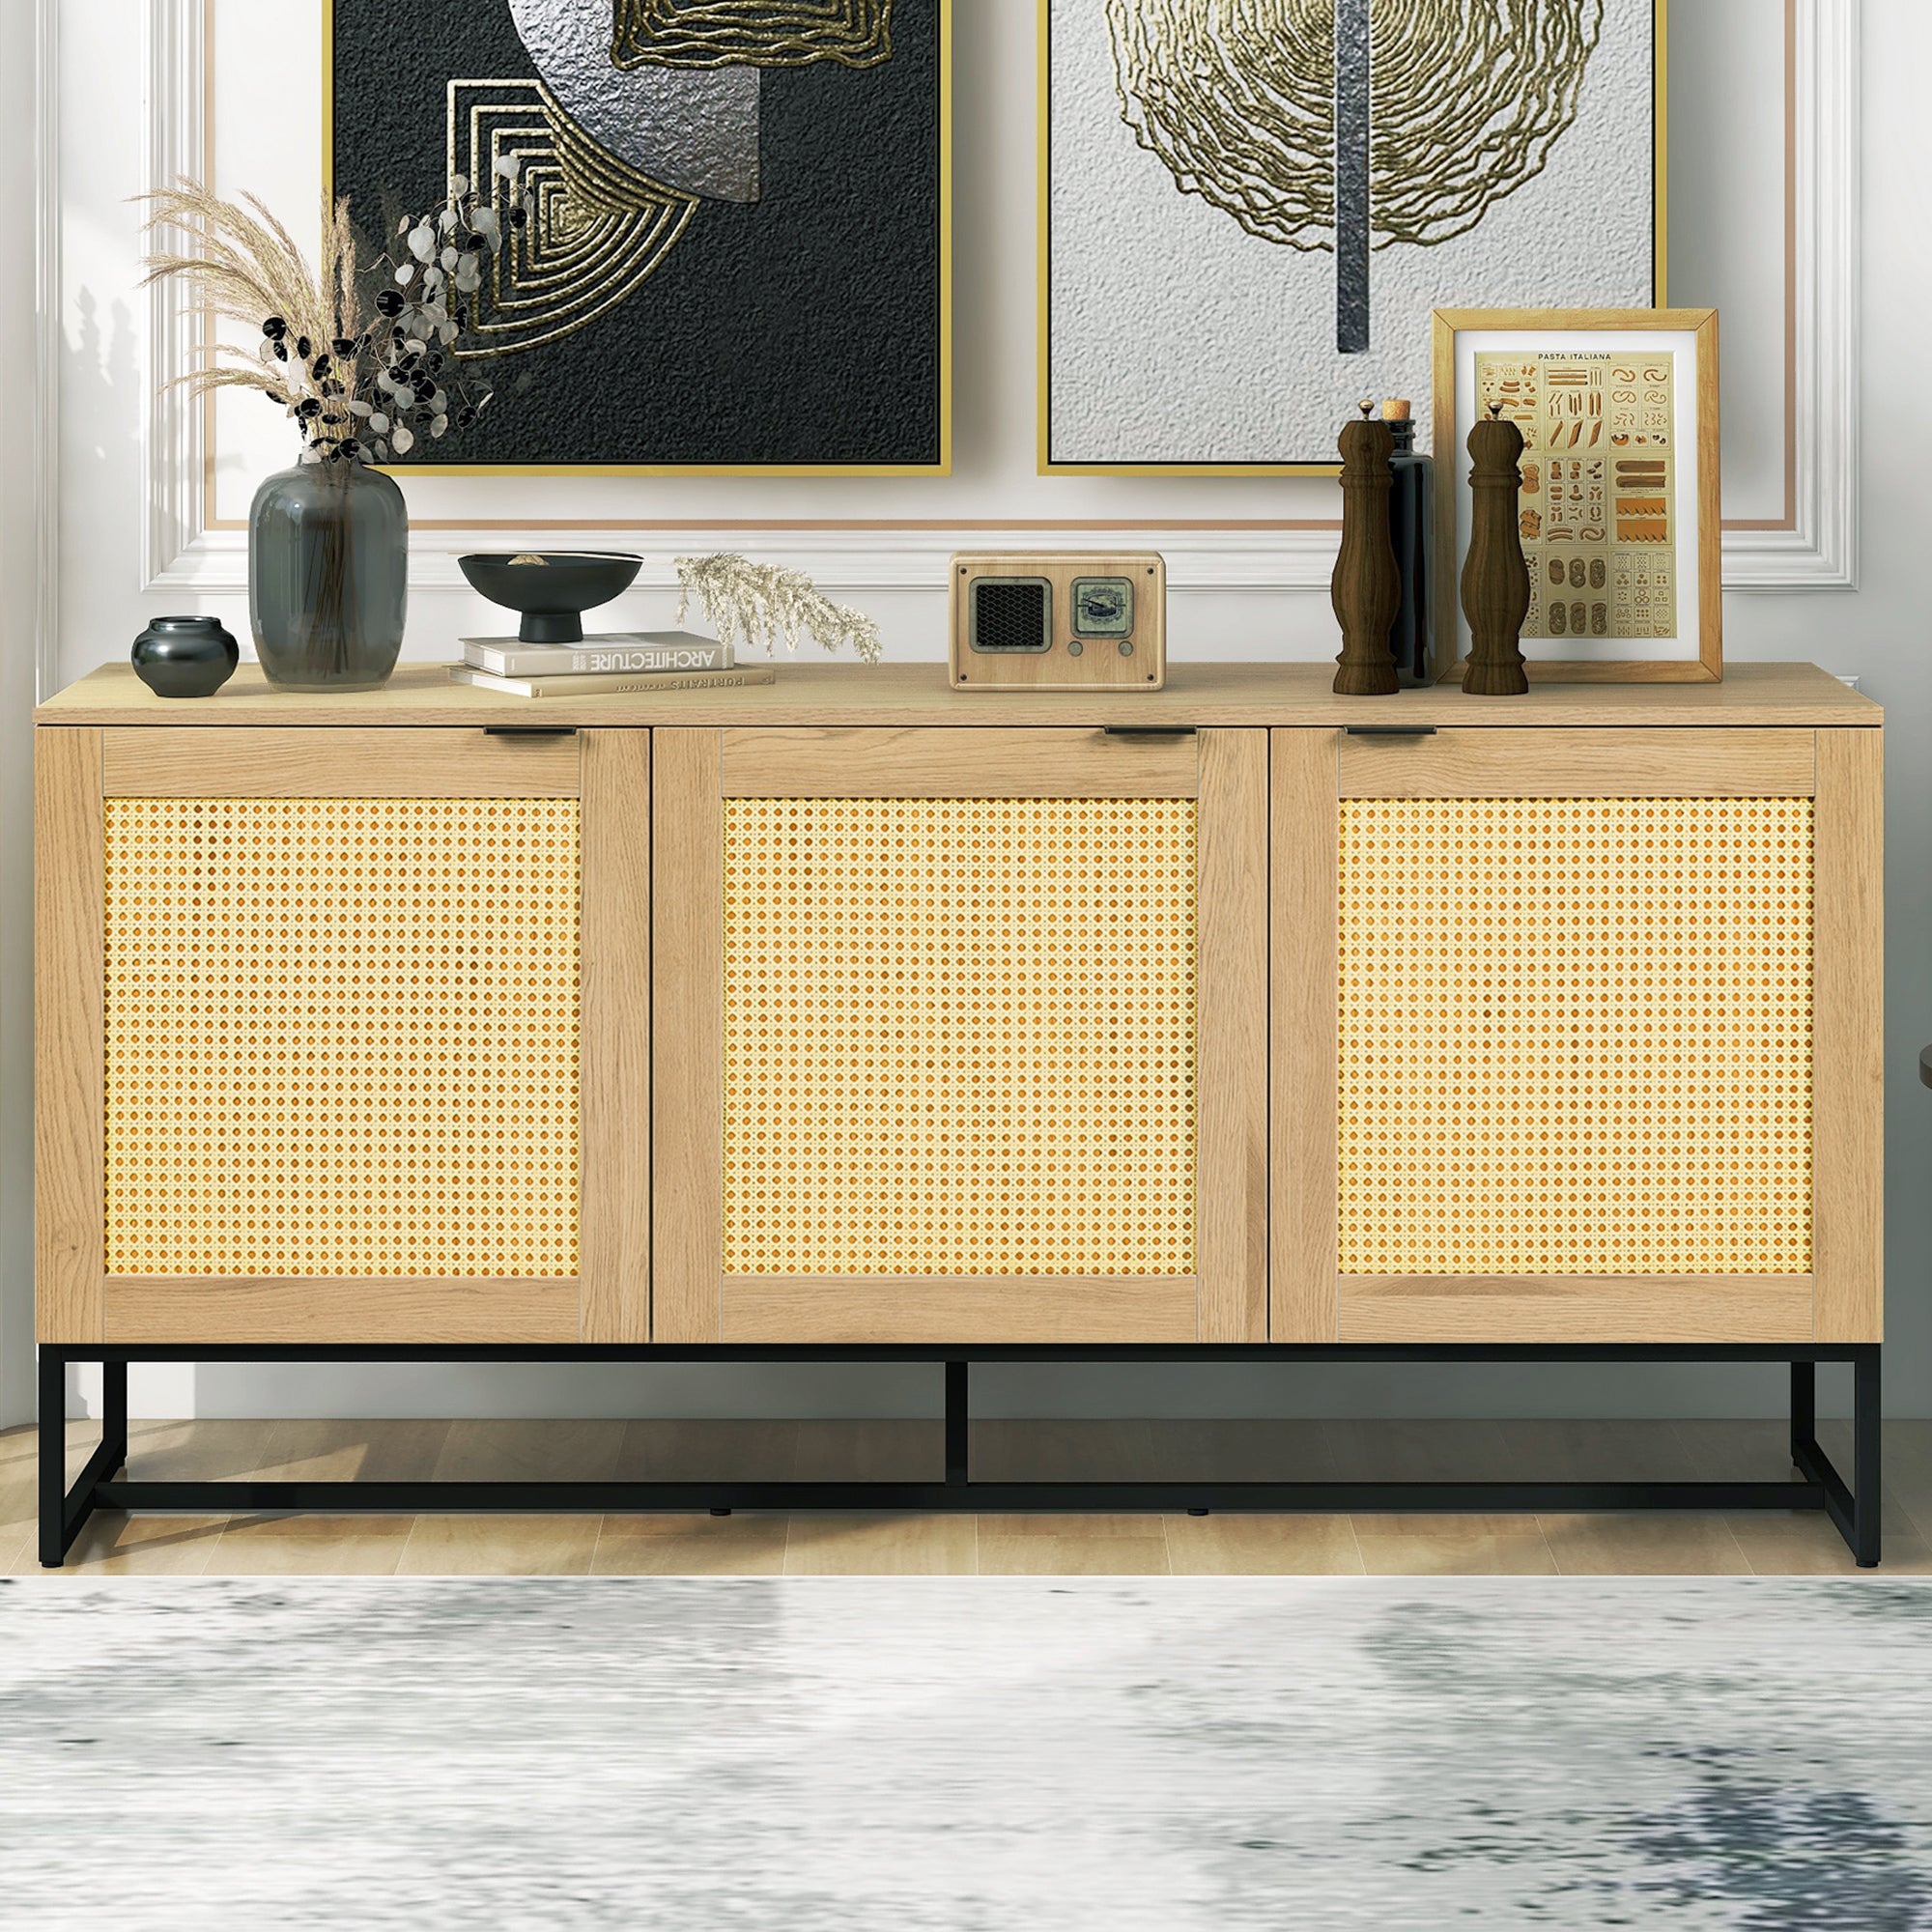 Wicker Sideboard Storage Cabinet 63 inch, with 3 doors - Natural color